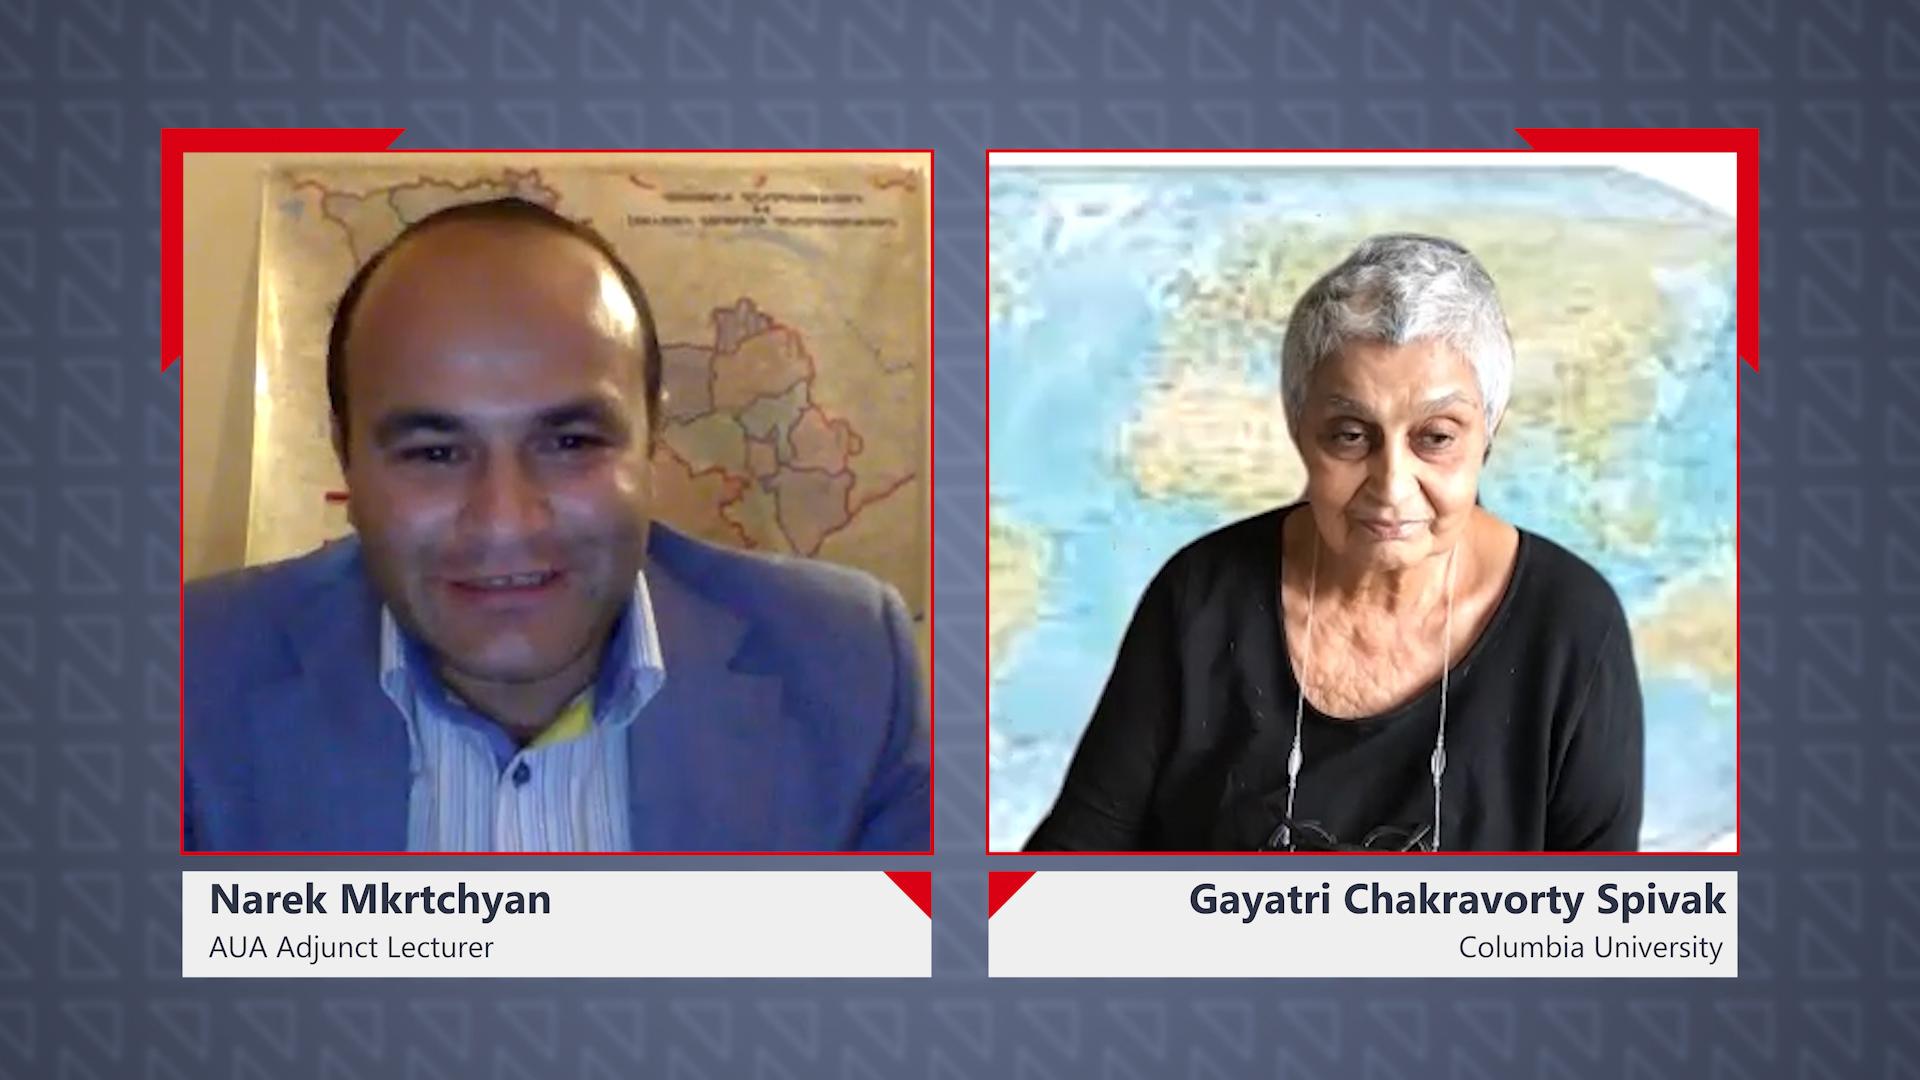 Is COVID-19 A Global Equalizer? A Conversation With Gayatri Chakravorty Spivak